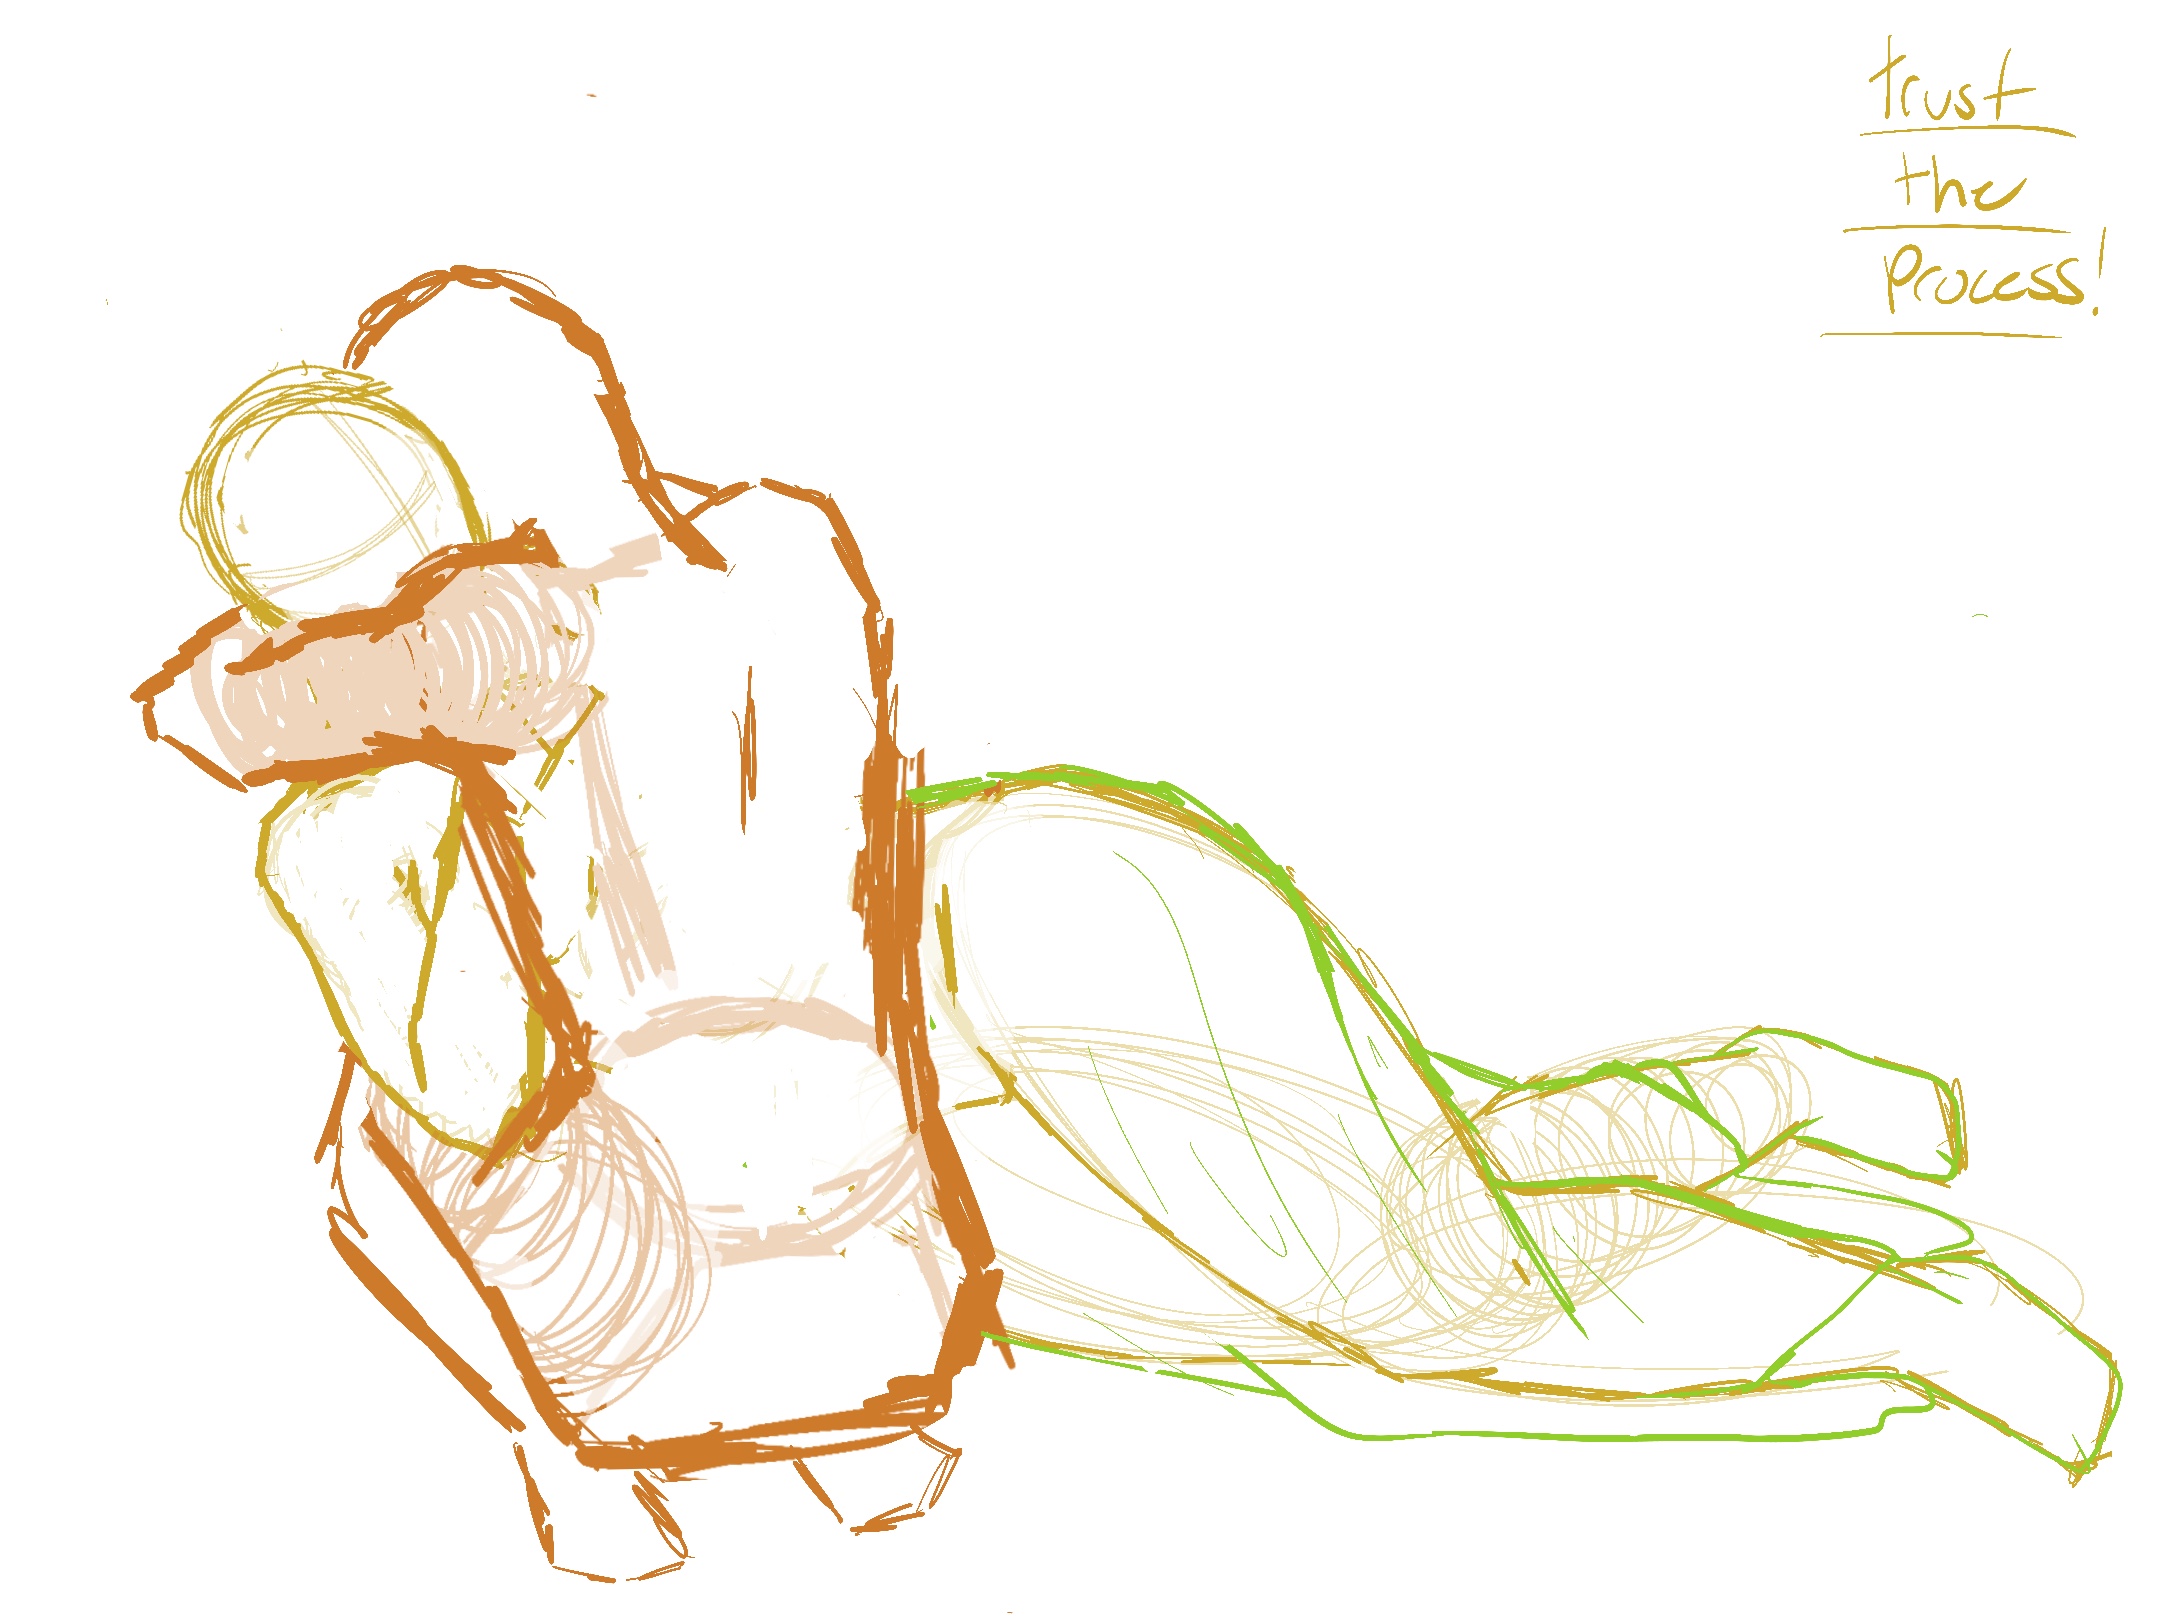 unfinished sketch of one person holding another on the ground